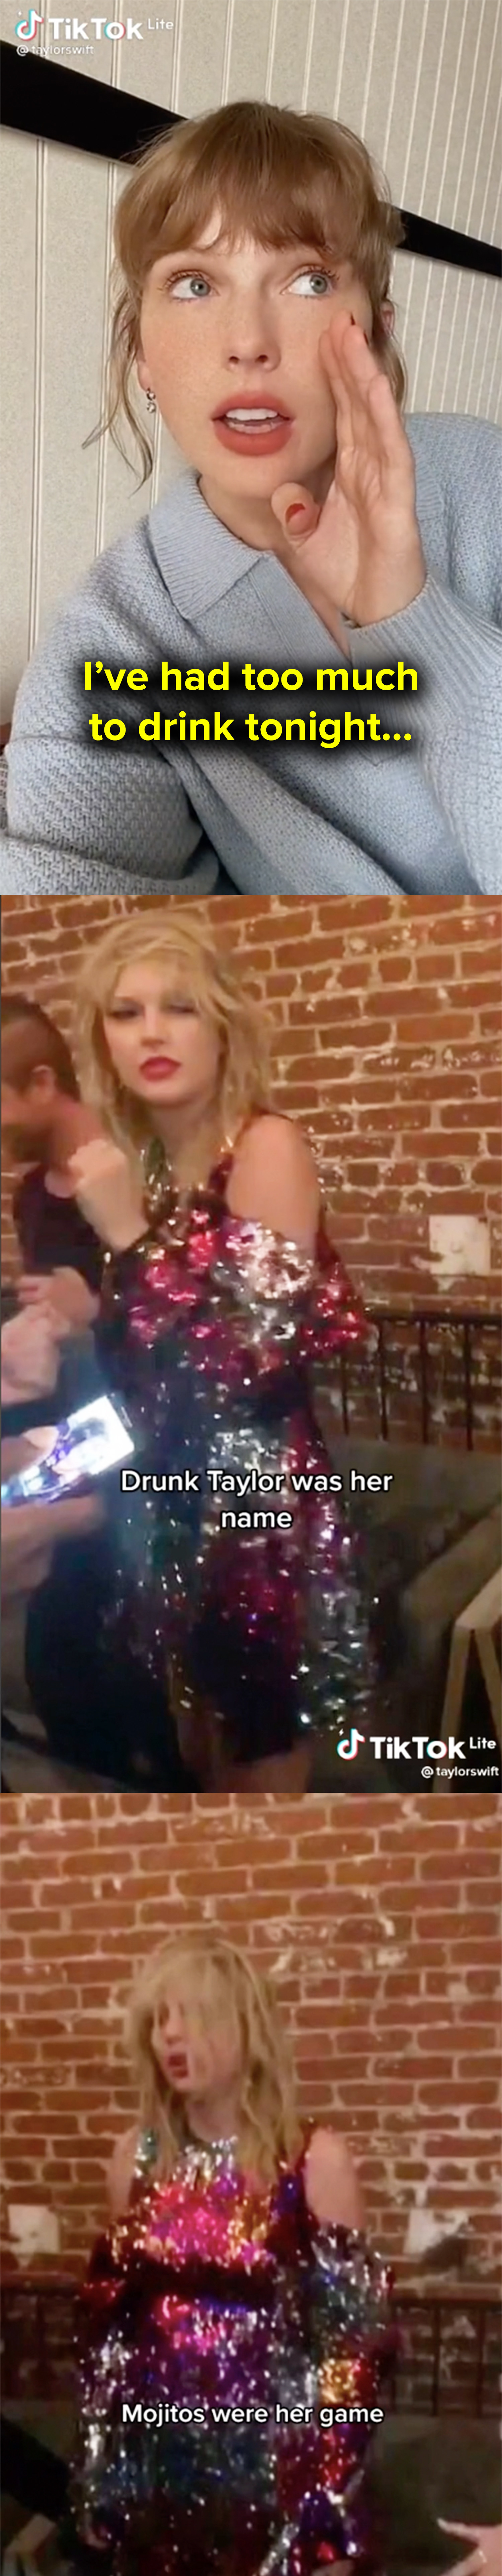 I&#x27;ve had too much to drink tonight...flashback to Drunk Taylor was her name, mojitos were her game